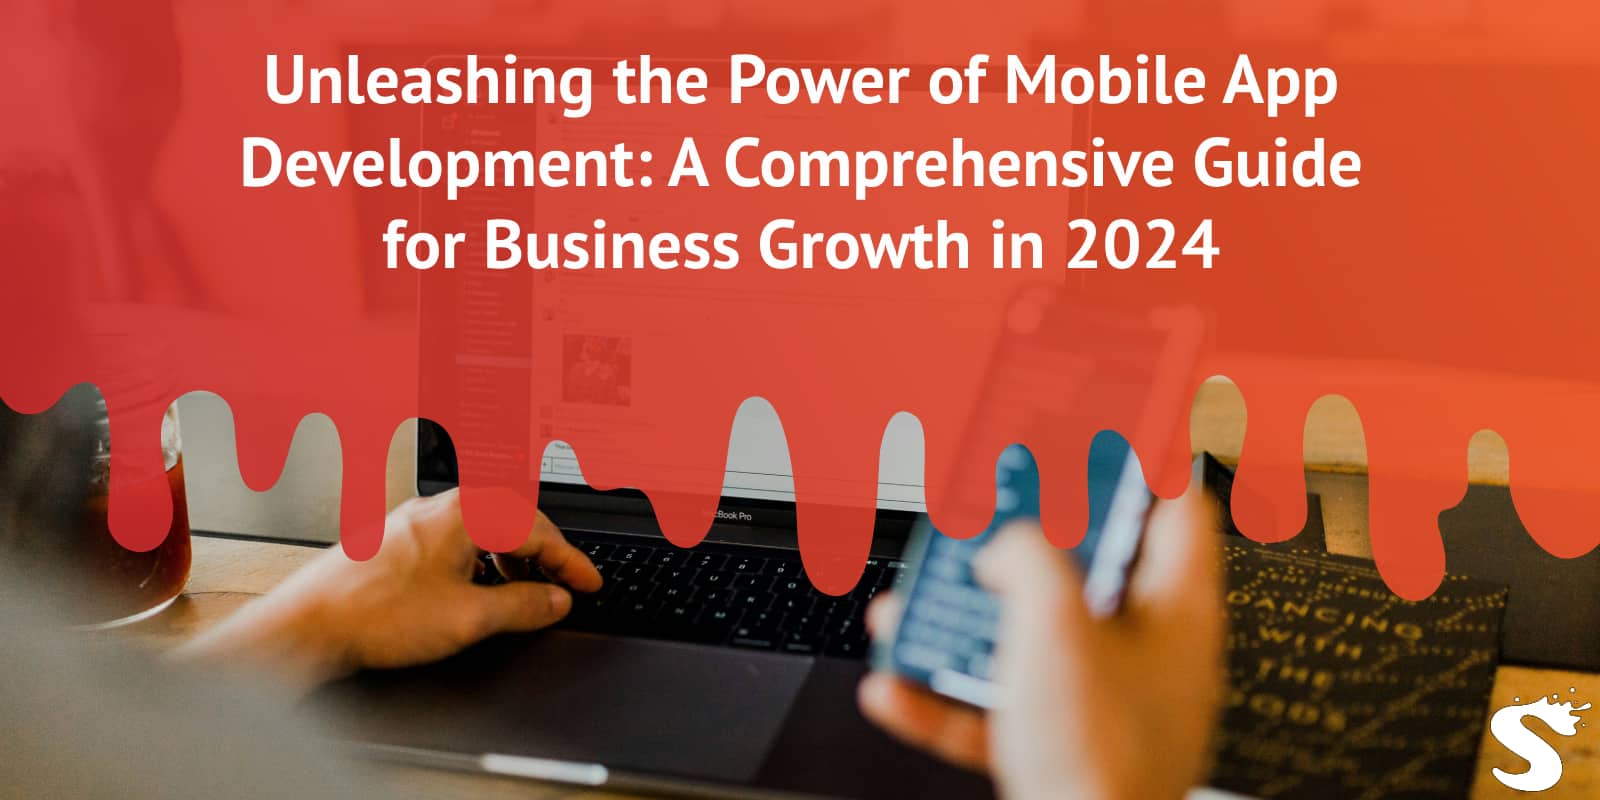 Unleashing the Power of Mobile App Development: A Comprehensive Guide for Business Growth in 2024